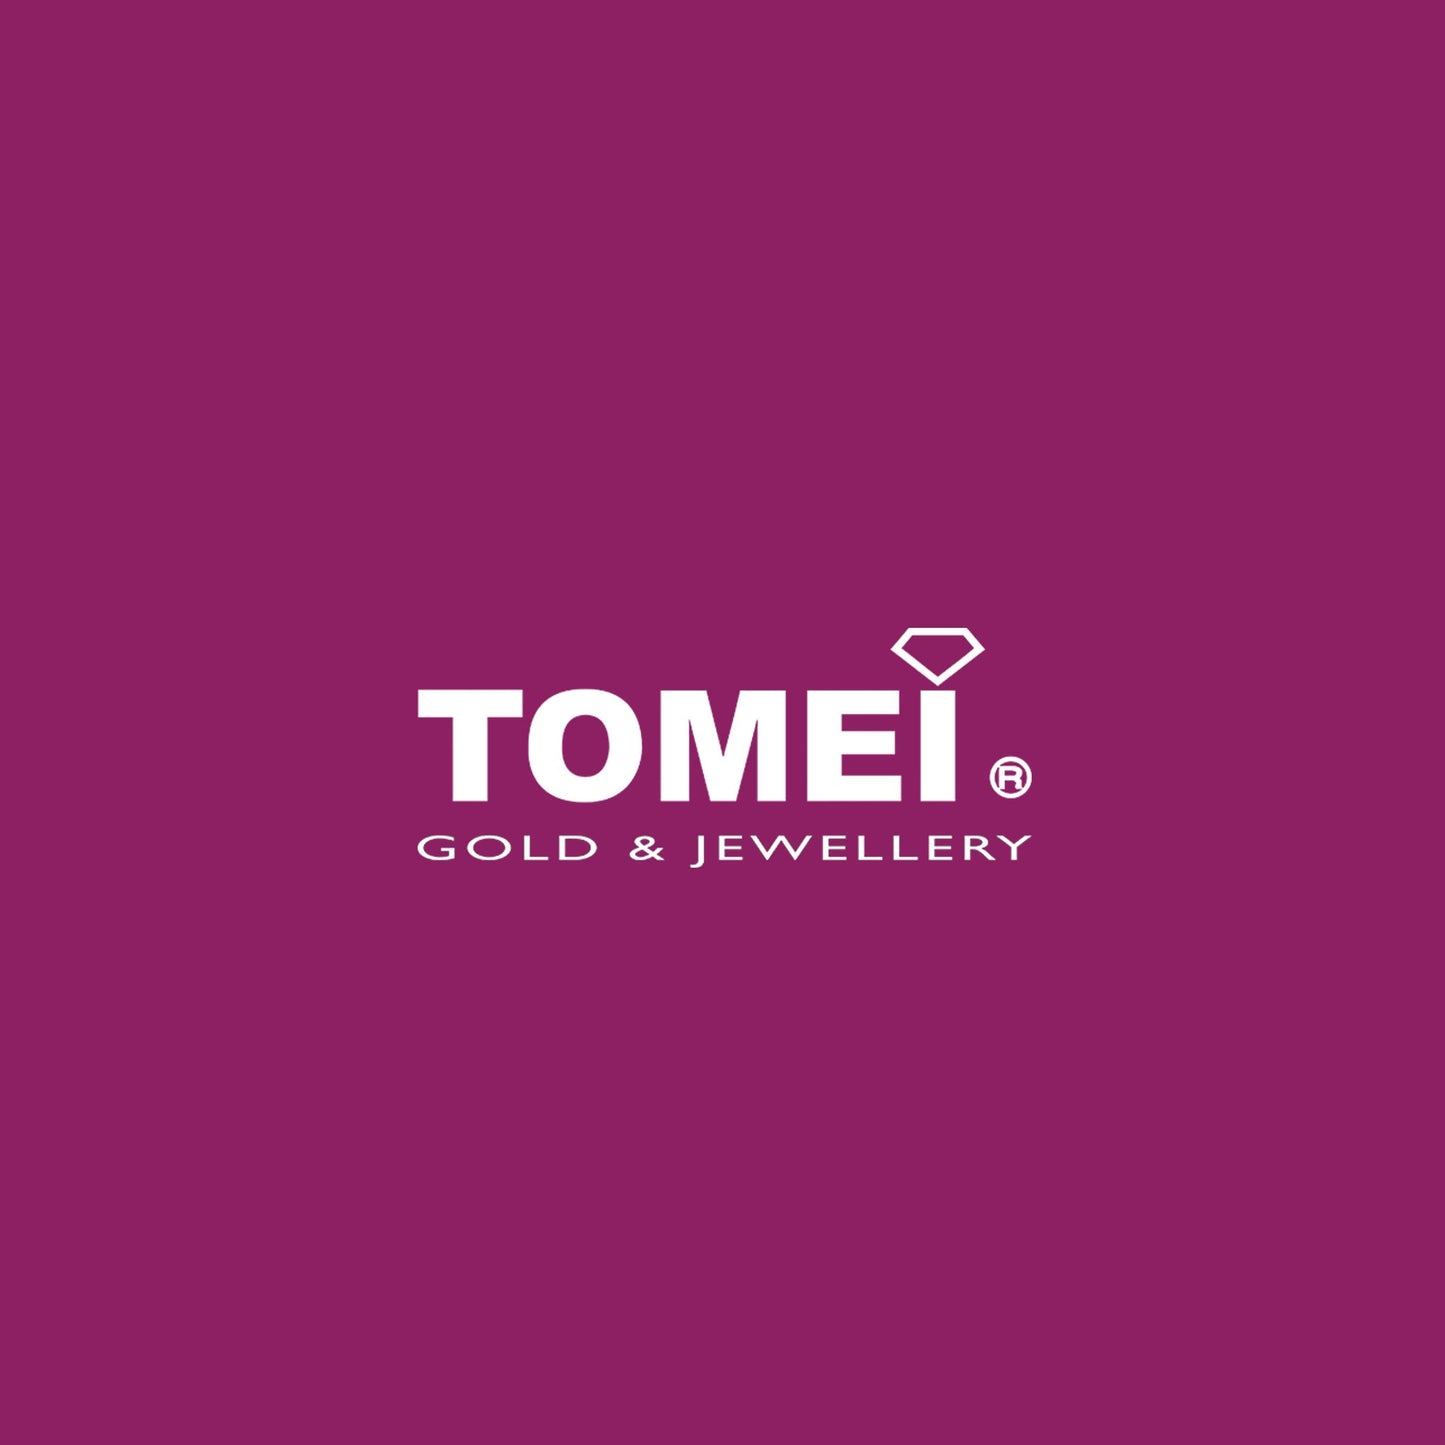 TOMEI Lovely Knot Pendant, Yellow Gold 916 (9P-YG1041P-1C)